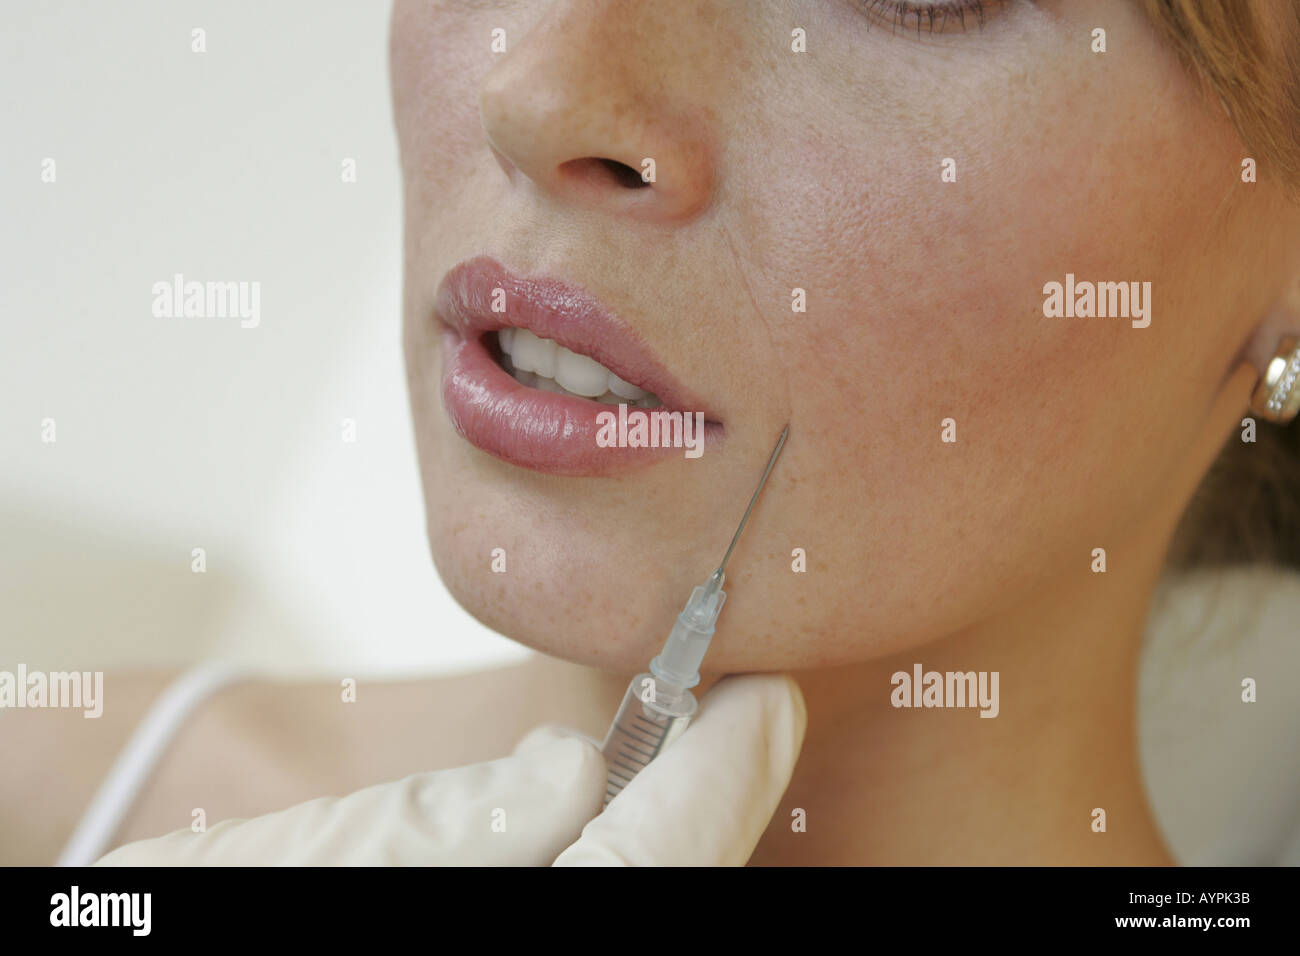 Young woman getting an injection on her face Stock Photo